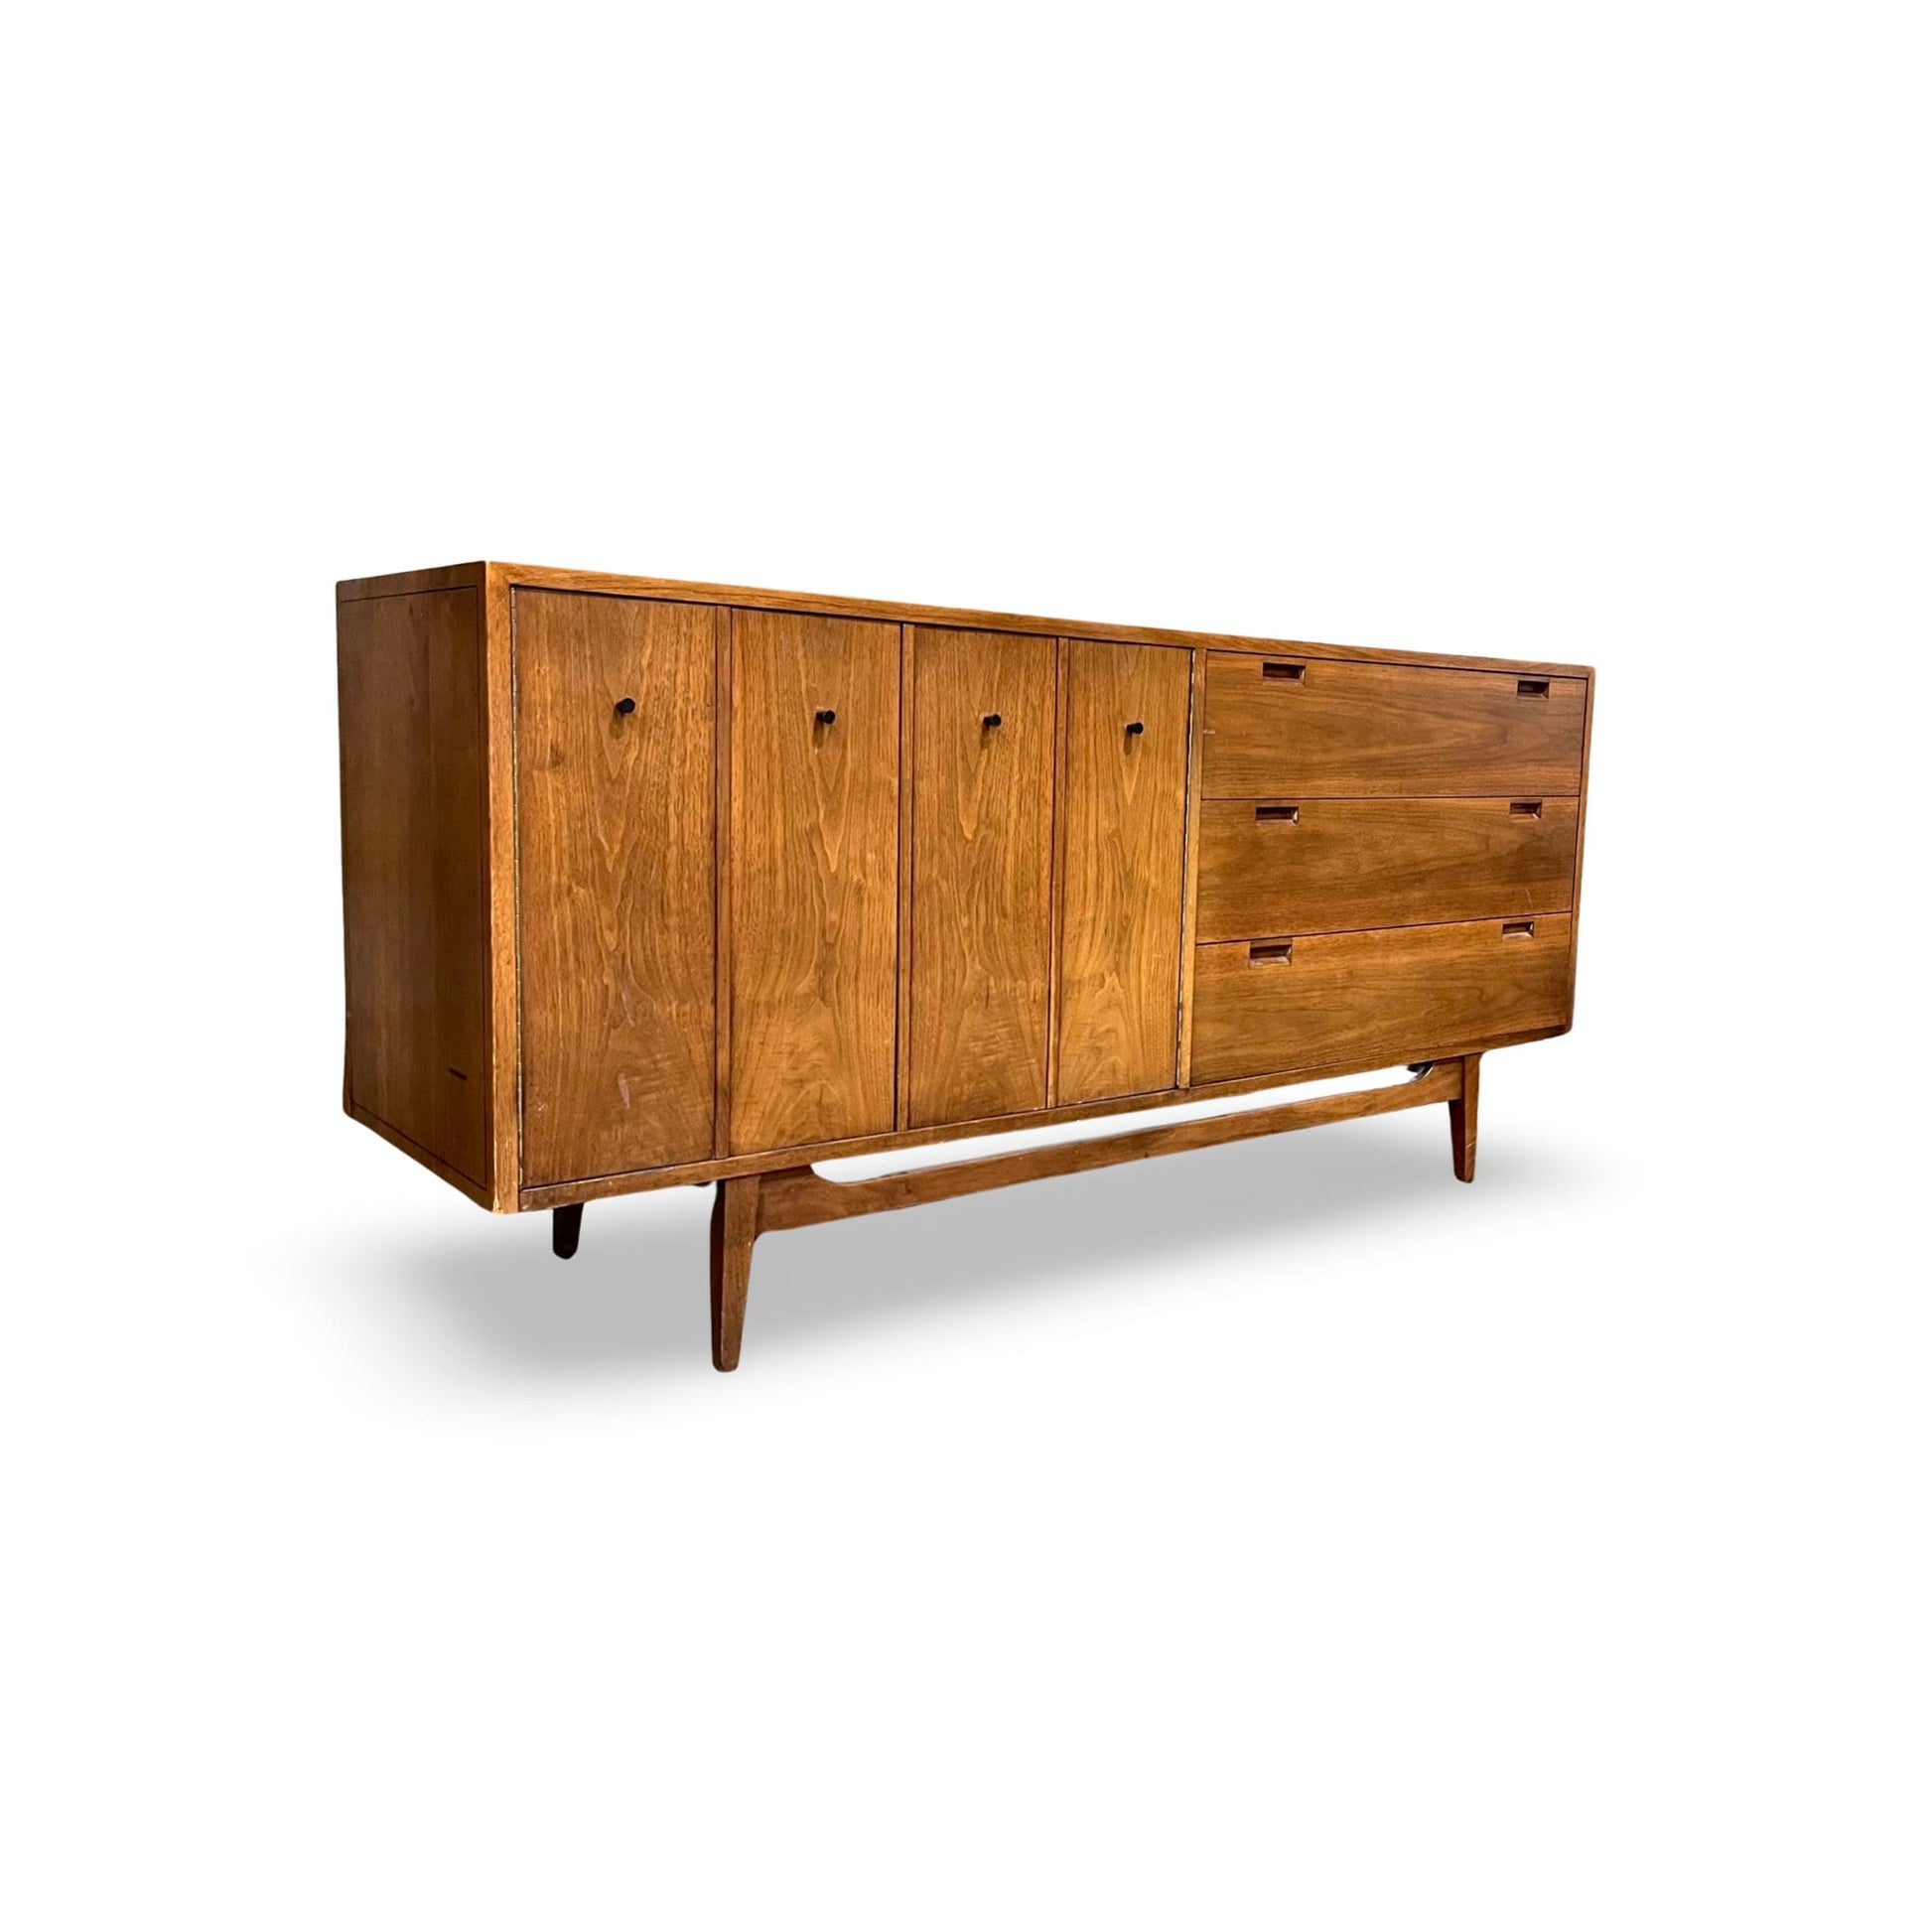 Mid-century Modern walnut dresser with concealed and accessible drawers.